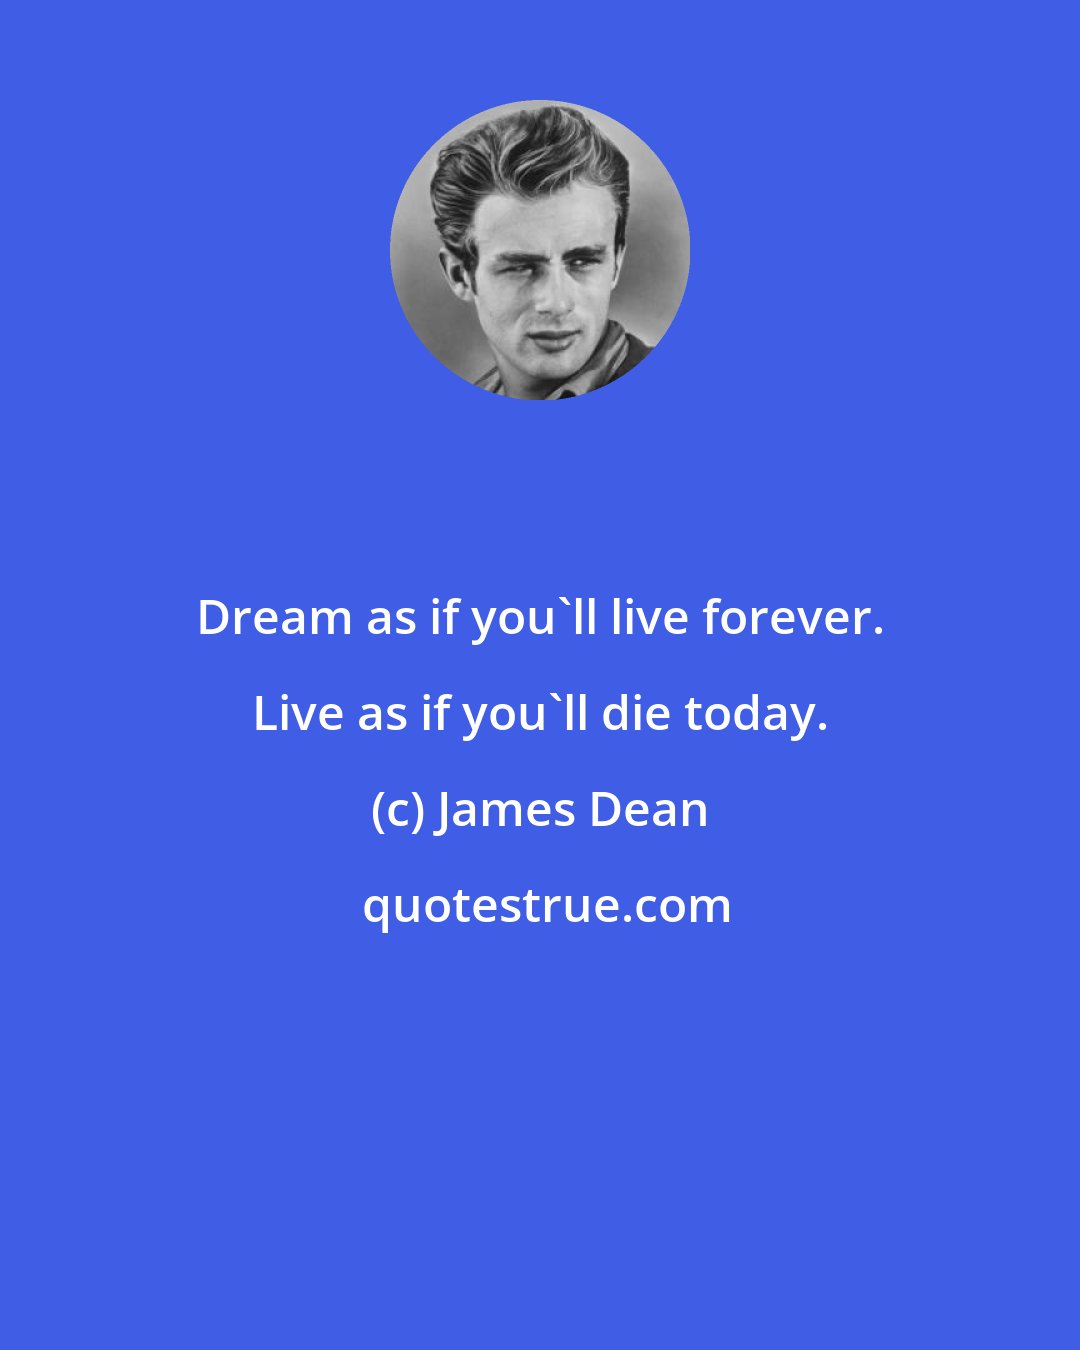 James Dean: Dream as if you'll live forever. Live as if you'll die today.